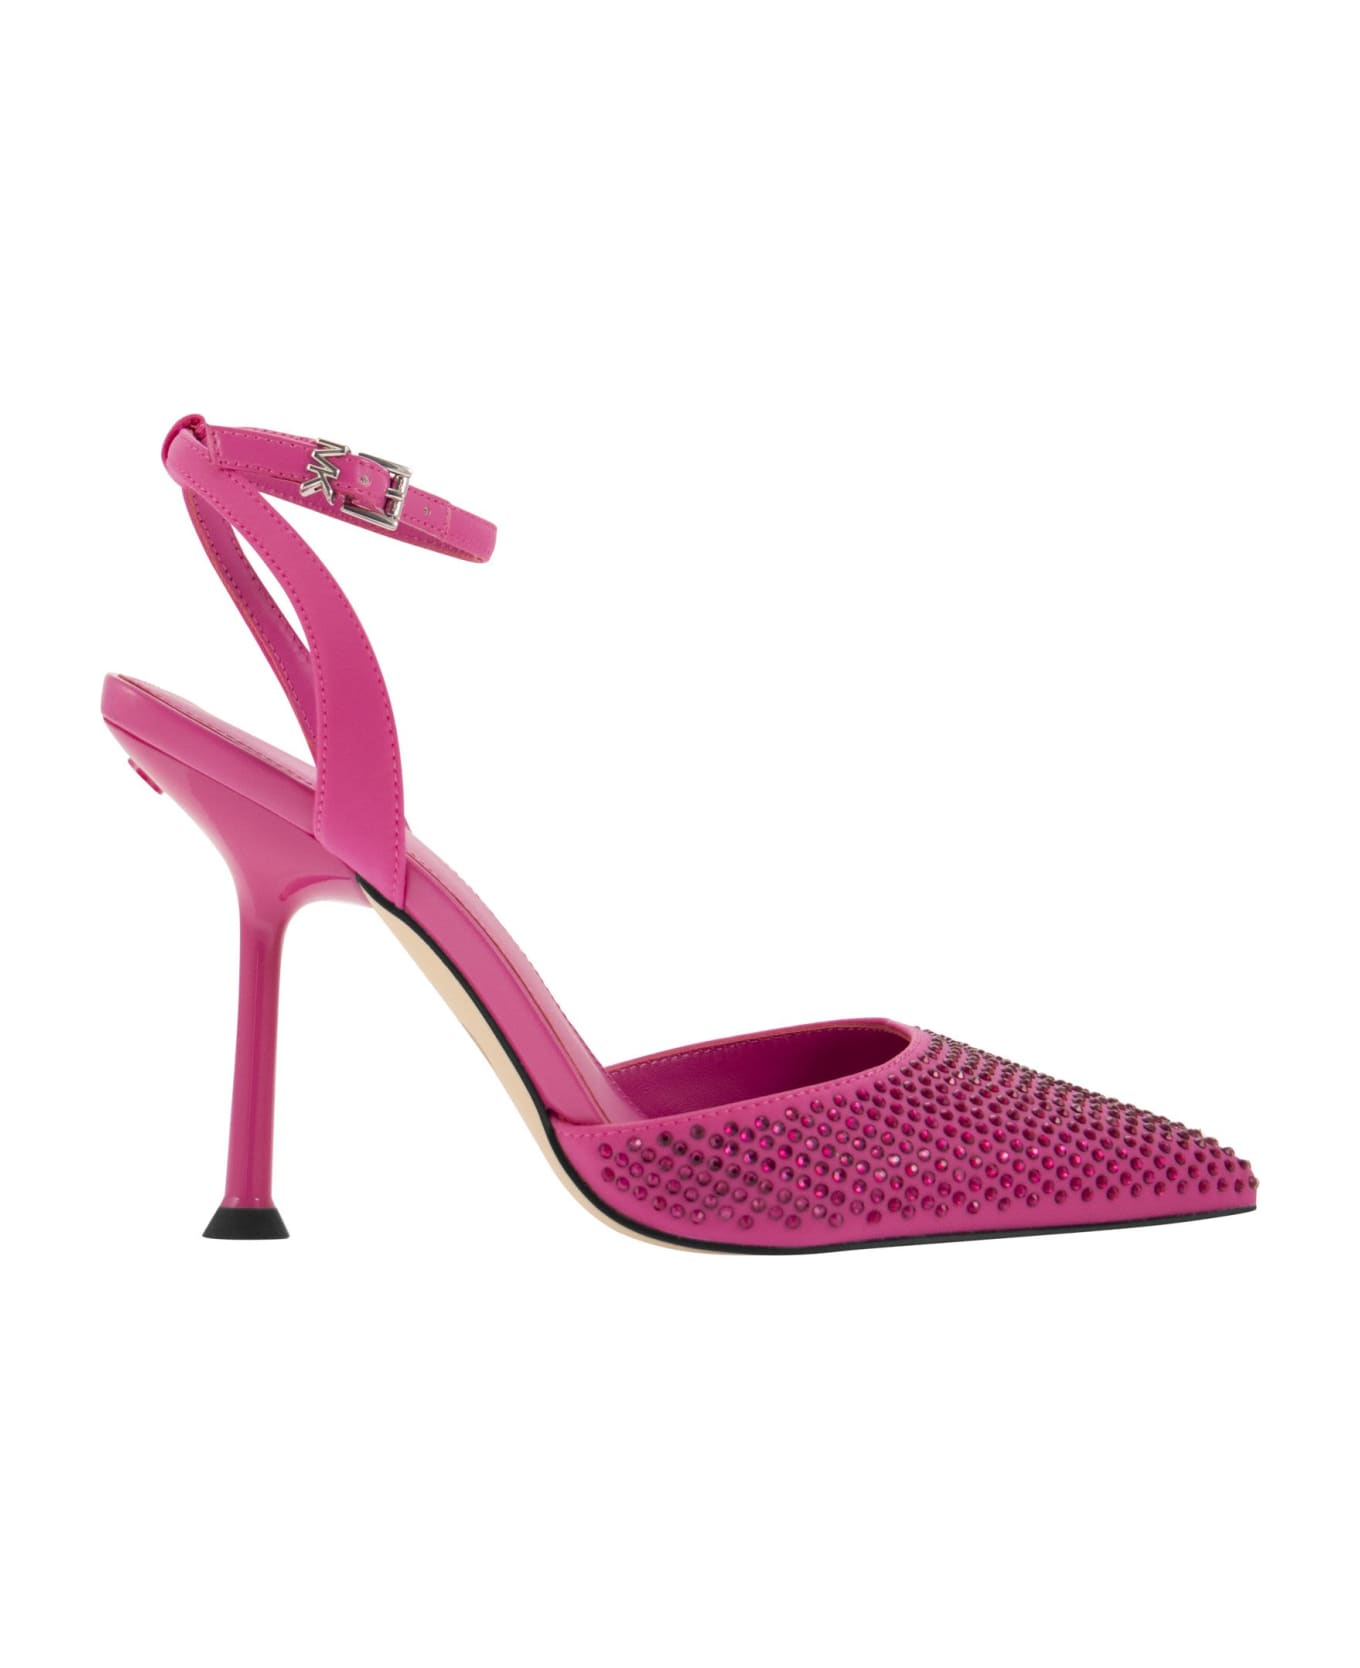 MICHAEL Michael Kors Imani Pump Pumps In Fabric With Crystals - Fucsia